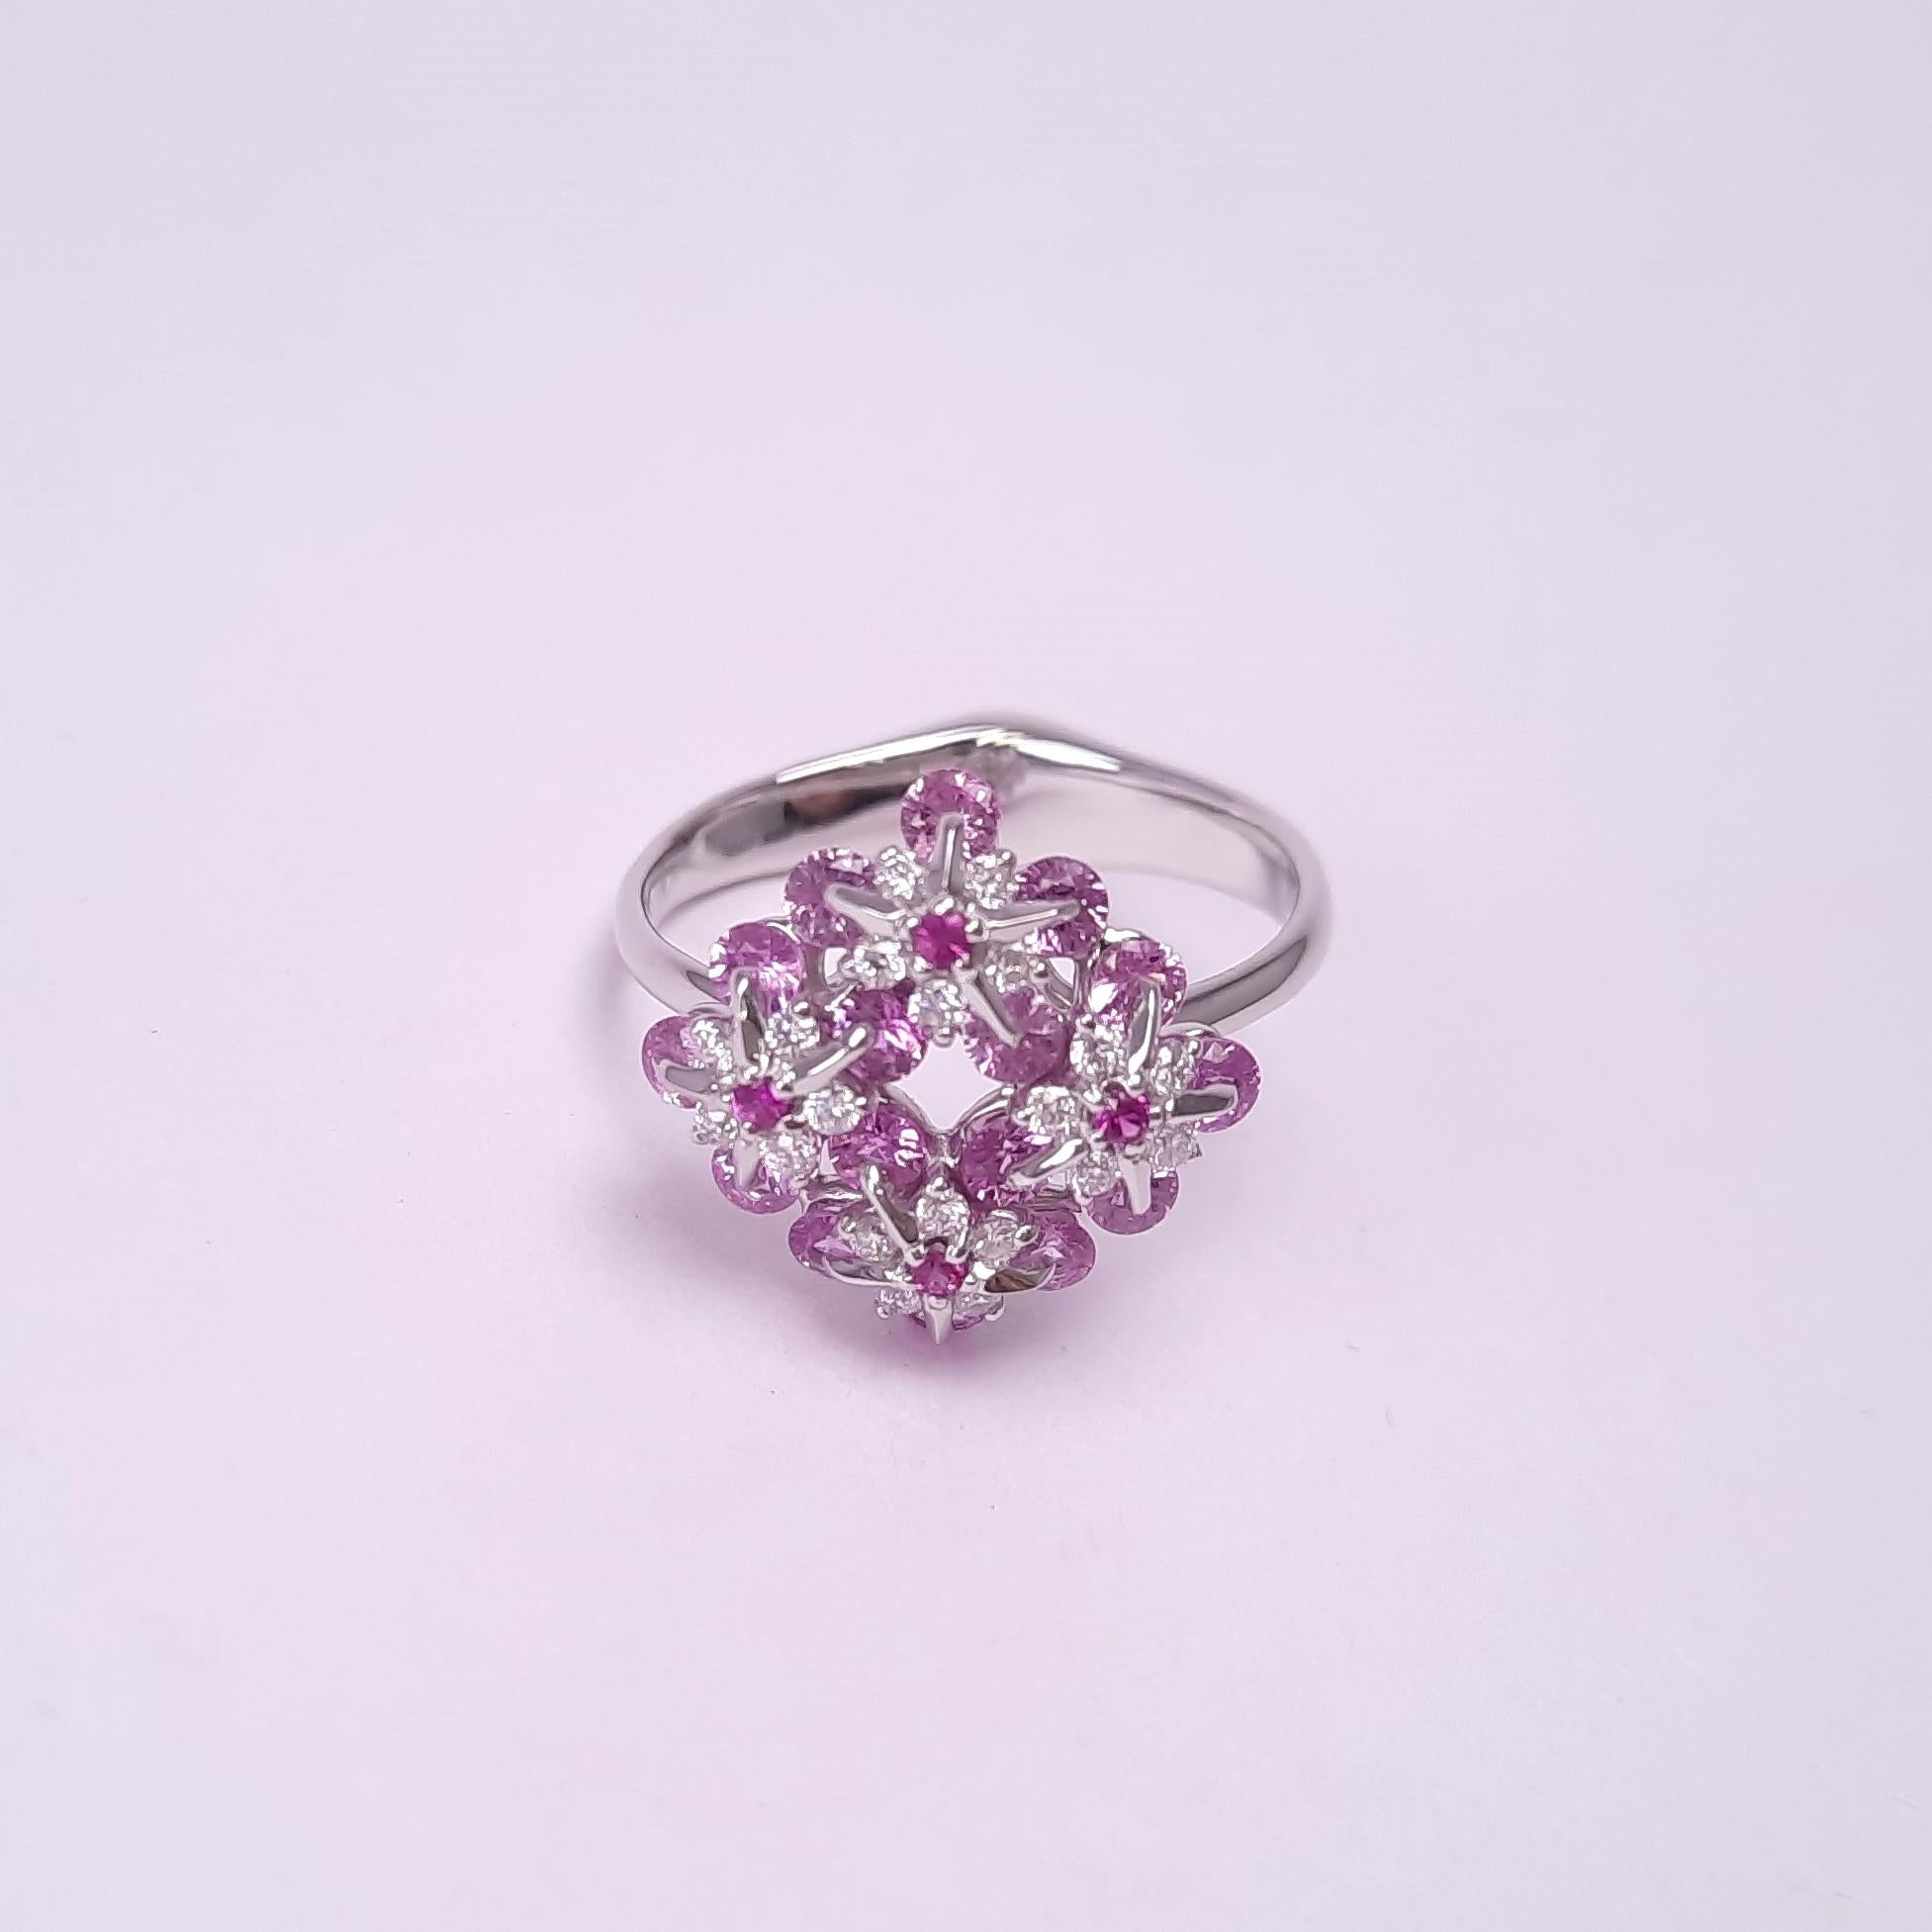 Symbol of remembrance and eternal love, Forget Me Not flower has become an everlasting flower made in 18karat white gold, diamonds and Rose pink sapphires. Mounted in Waltzing Brilliance technology, this lively ring will be a precious remembrance of